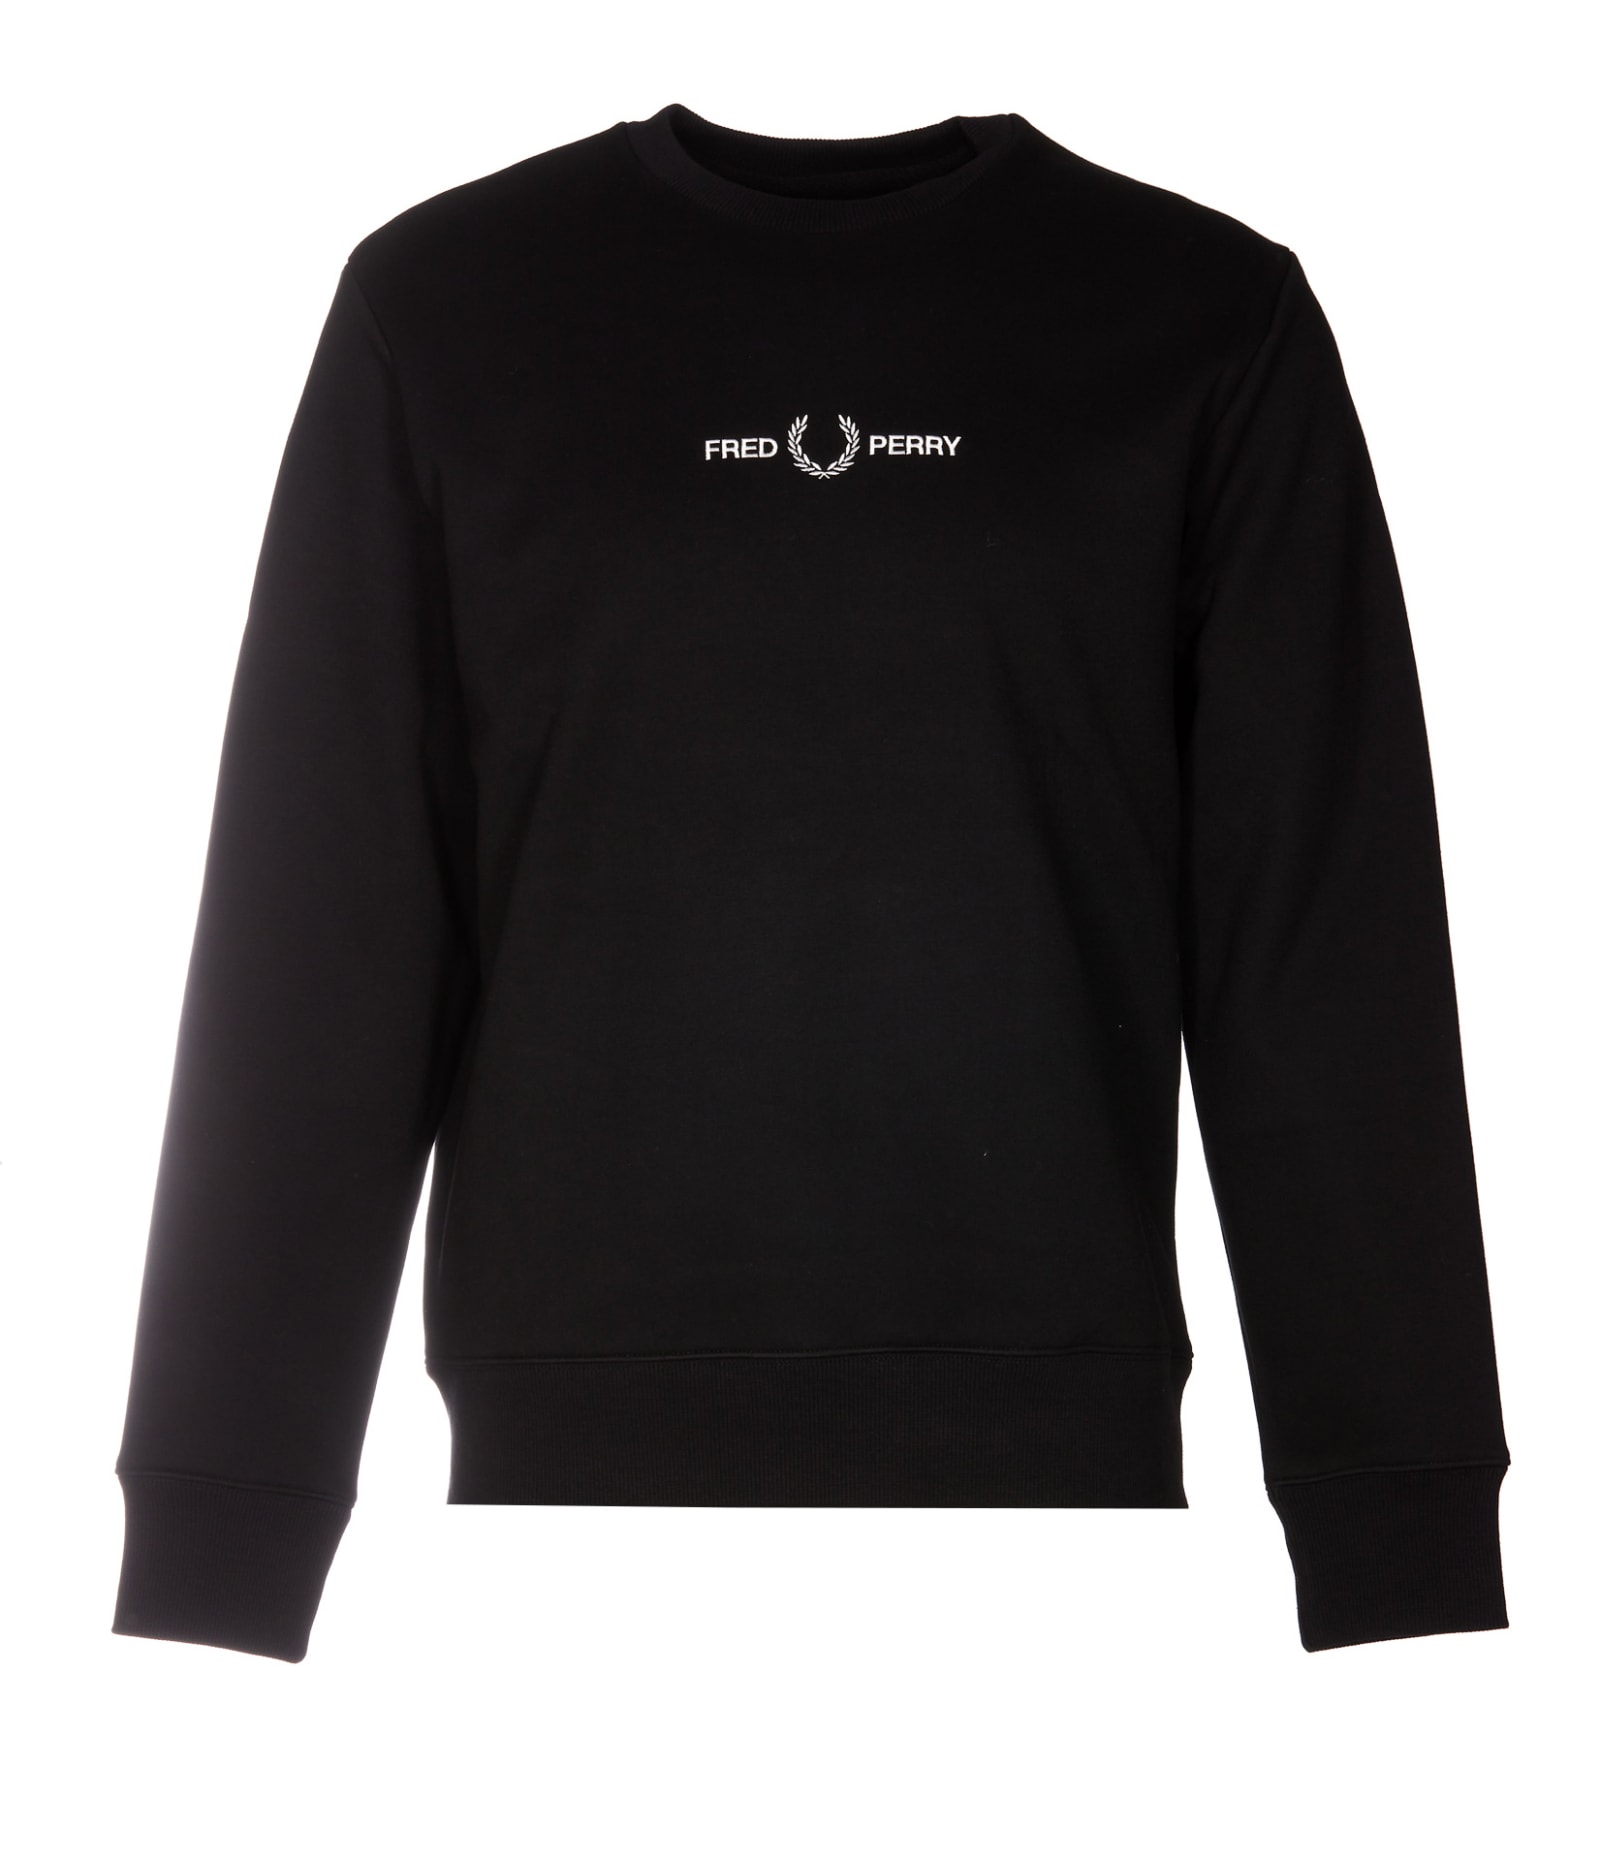 FRED PERRY LOGO EMBROIDERED SWEATSHIRT